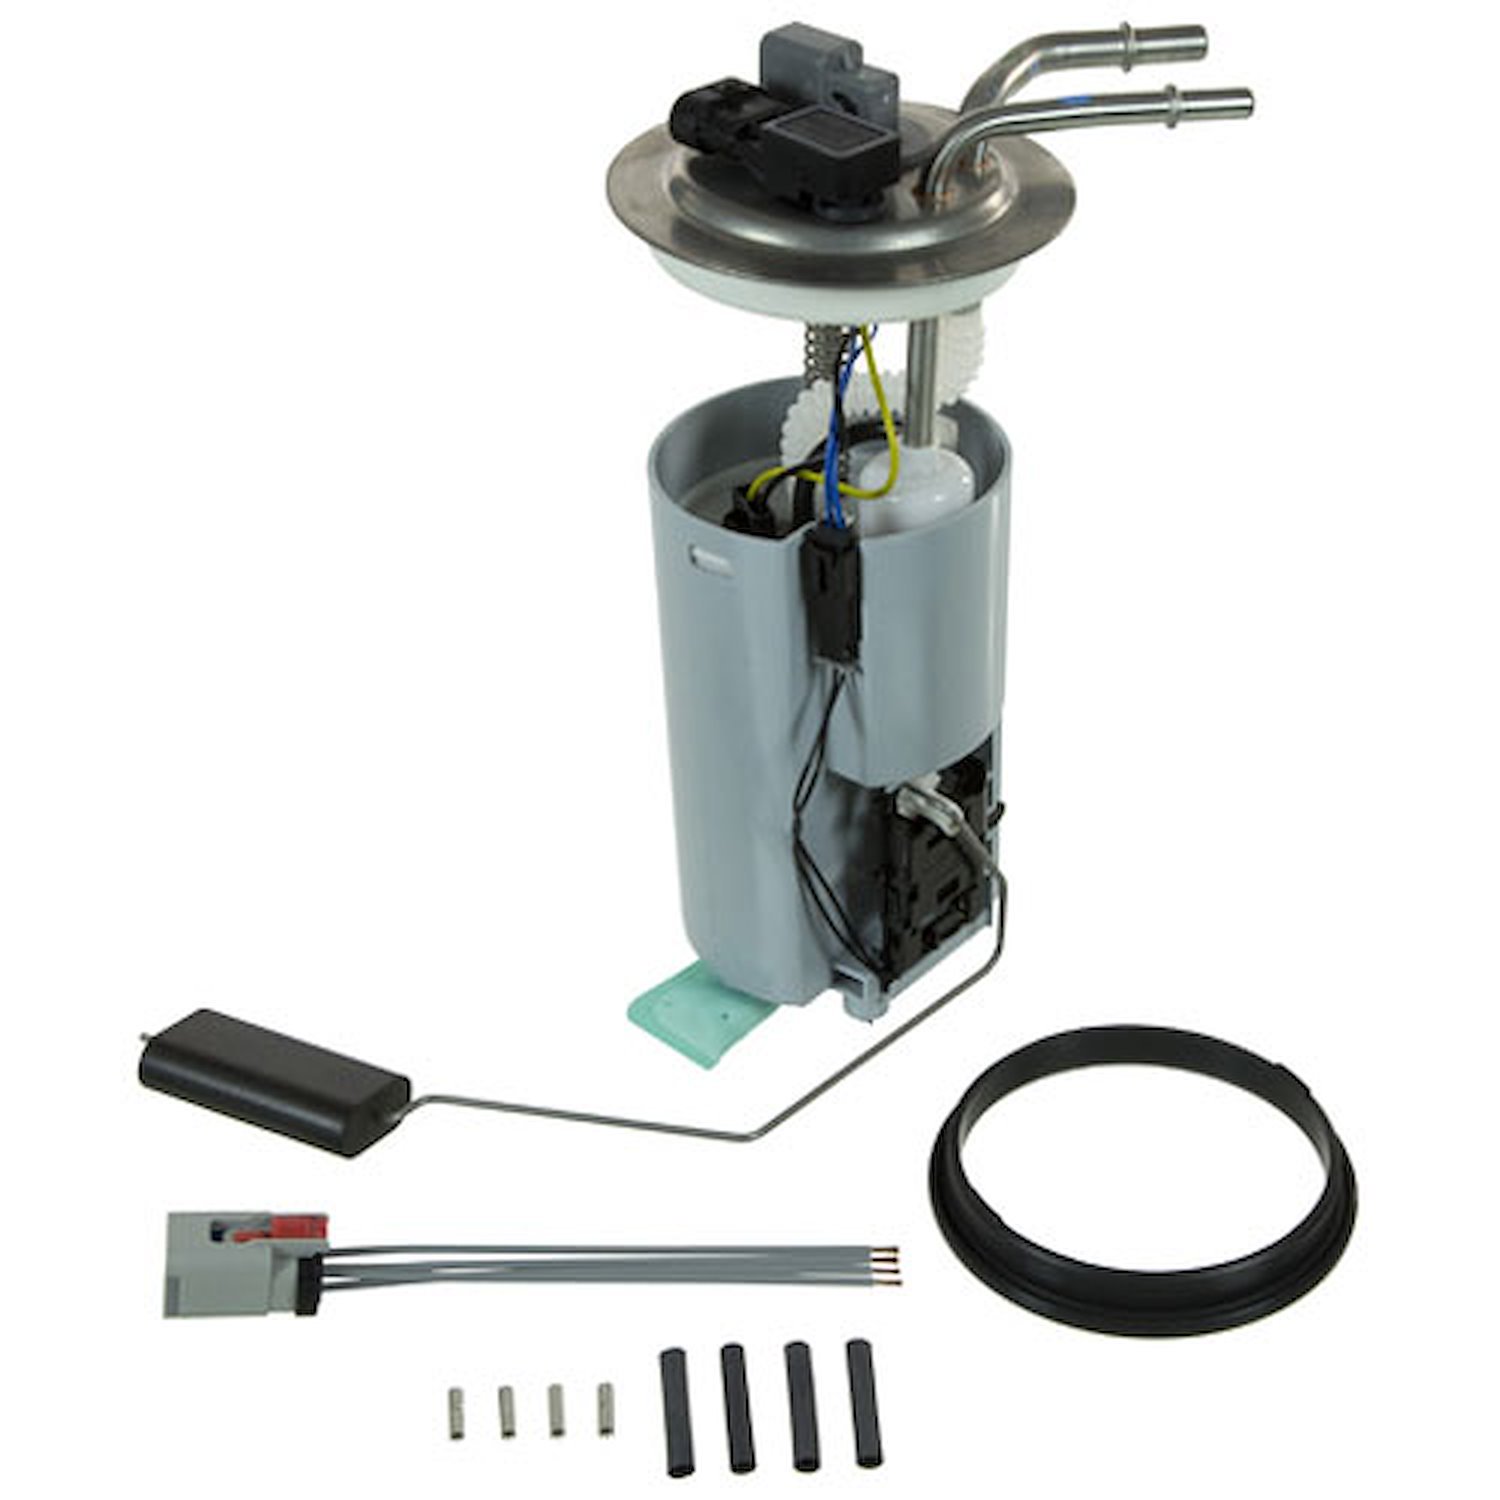 OE GM Replacement Electric Fuel Pump Module Assembly 2002-04 Chevrolet Suburban 1500 5.3L V8